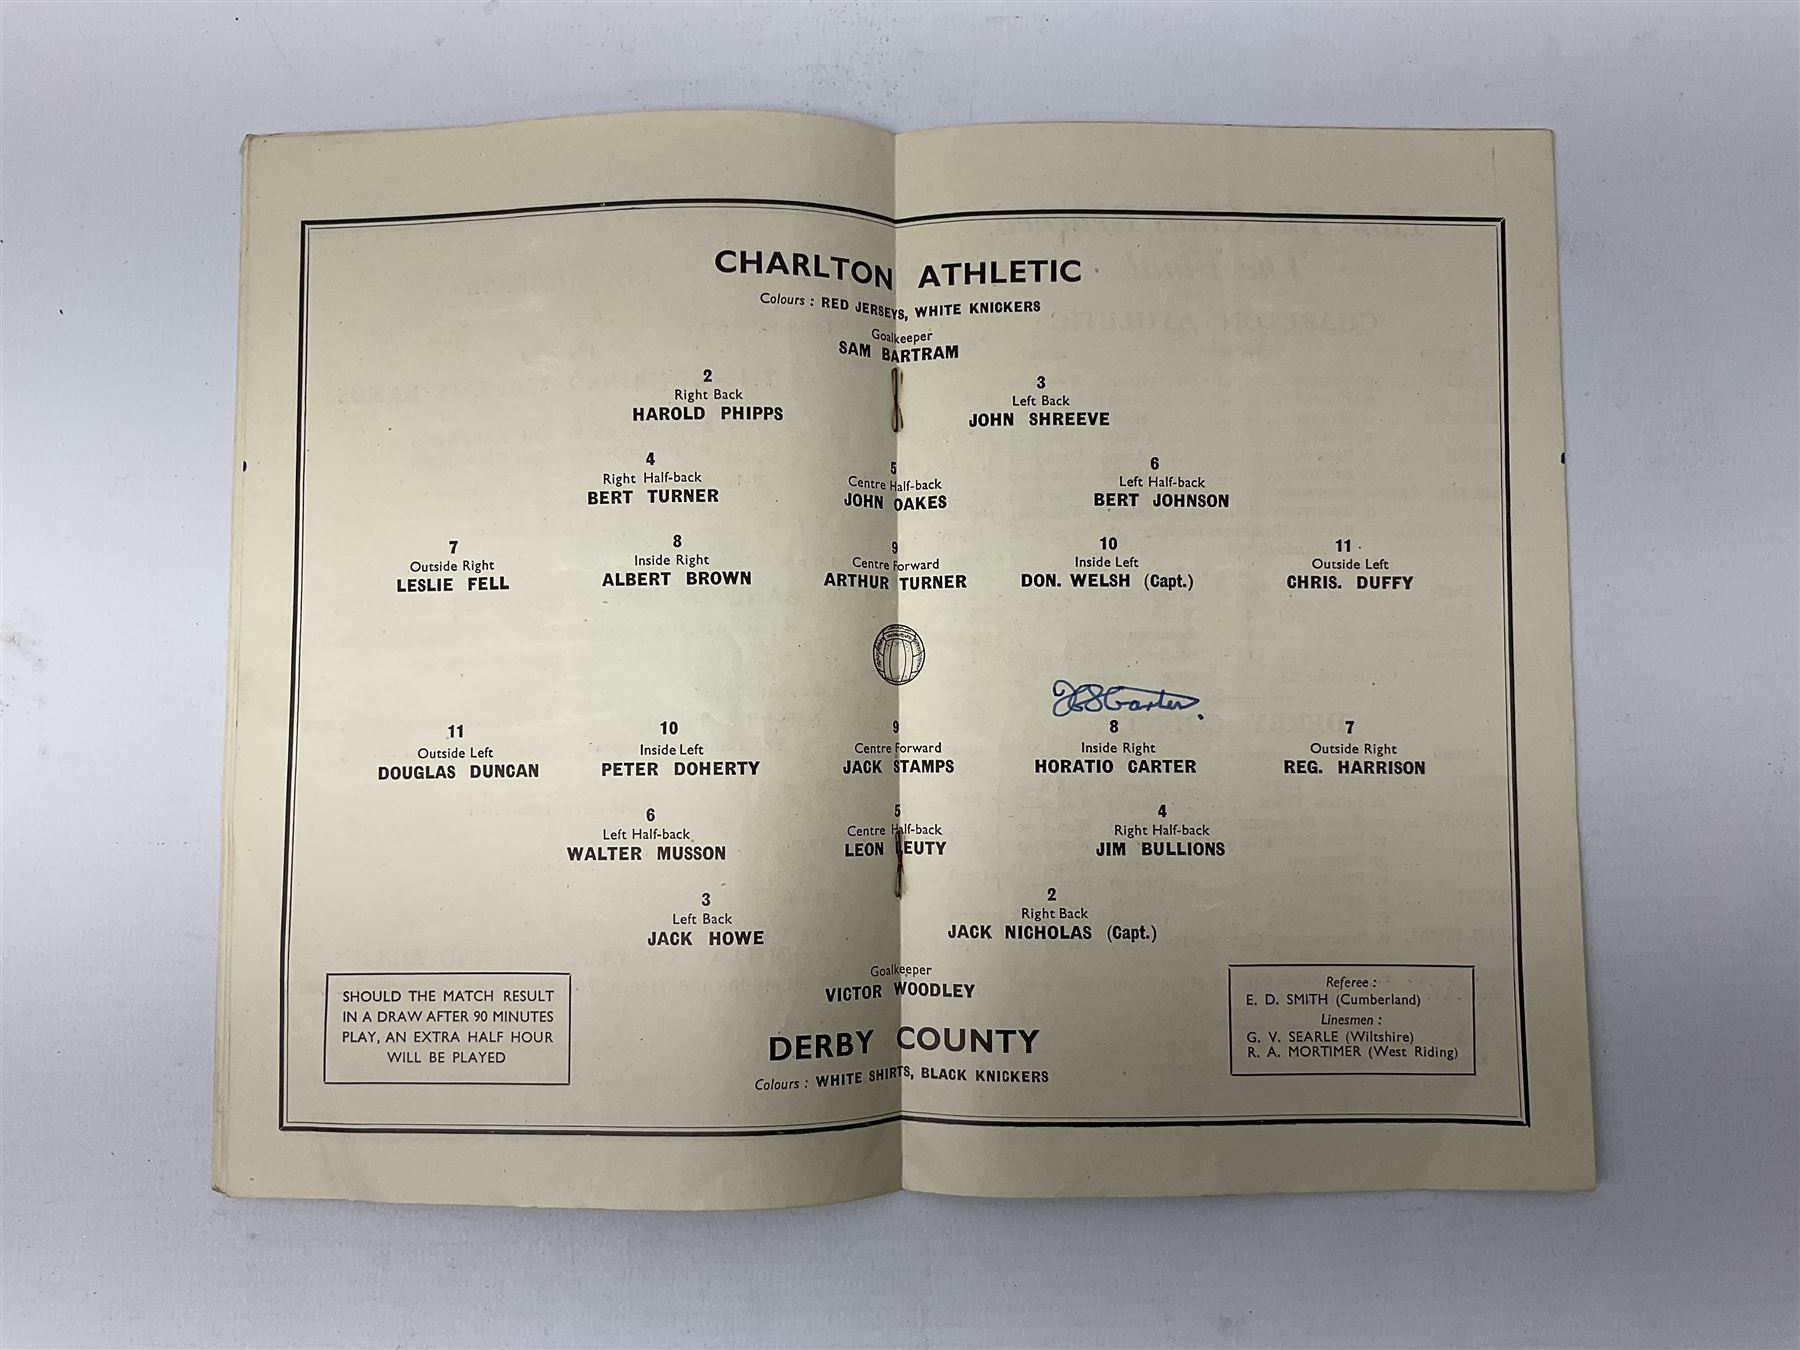 1946 FA Cup Final Charlton Athletic v Derby County football programme played 27th April 1946 at Wemb - Image 6 of 9